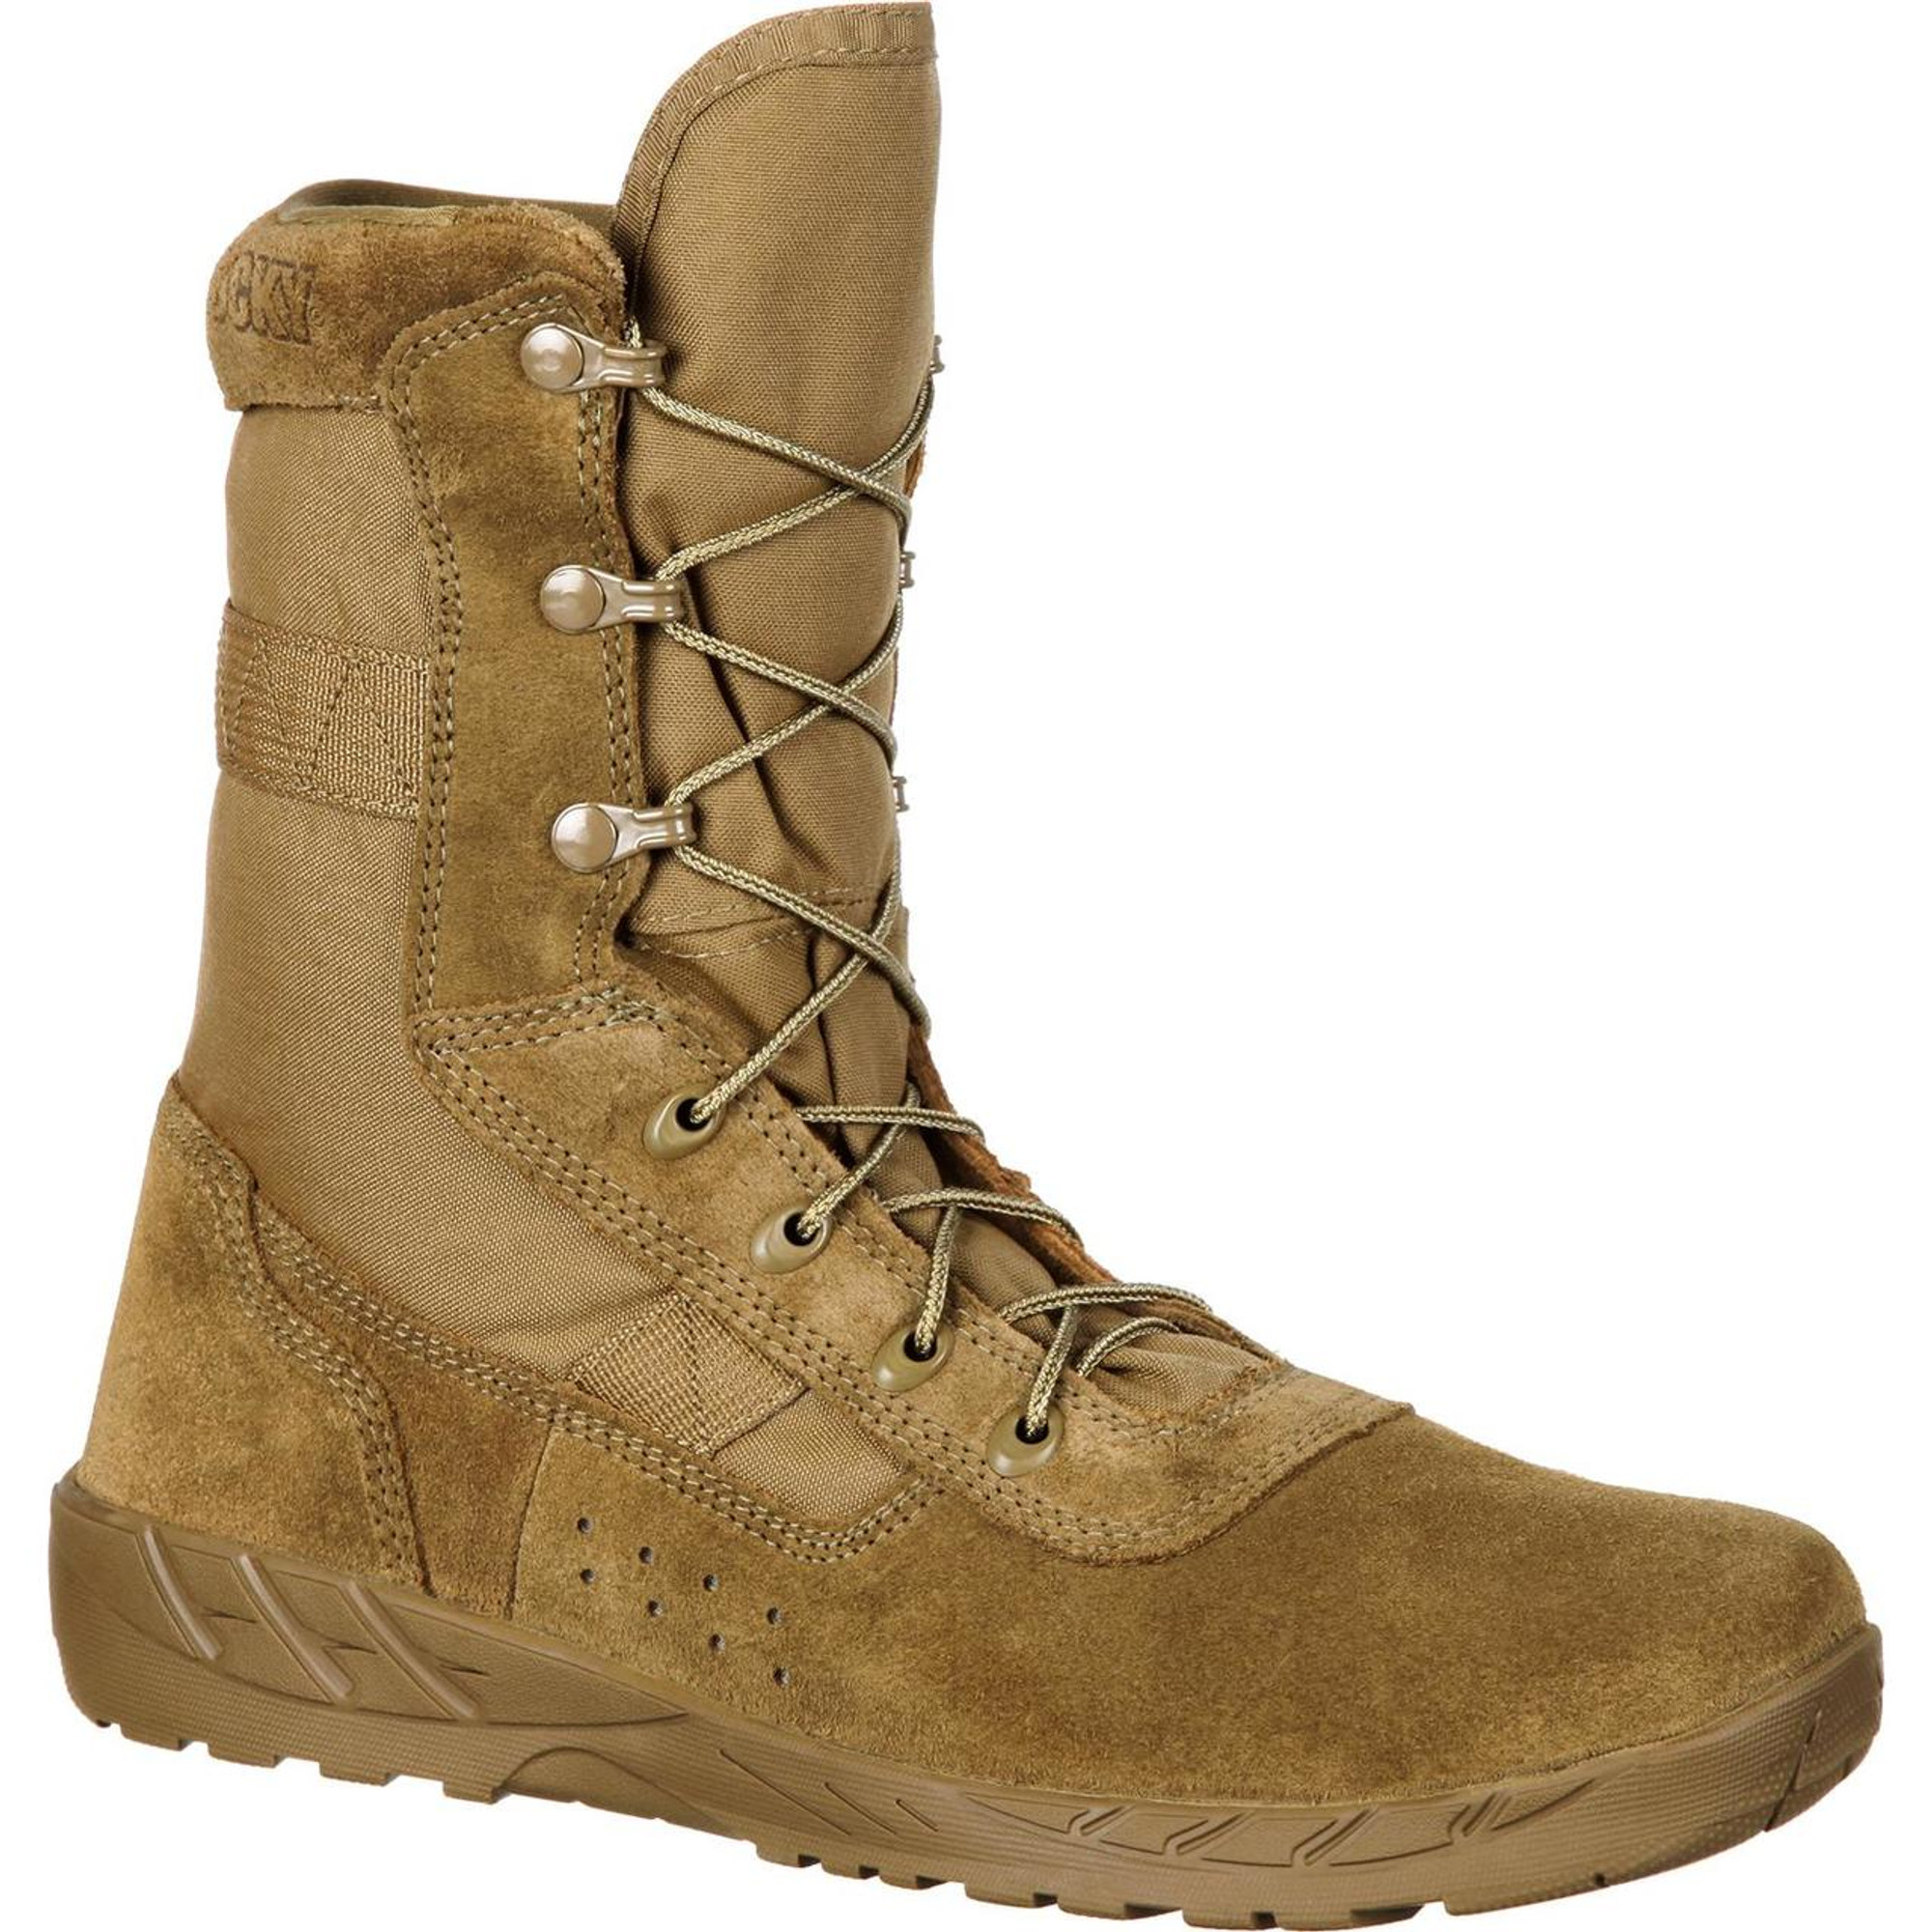 Rocky C7 CXT Lightweight Commercial Military Boot - Coyote Brown